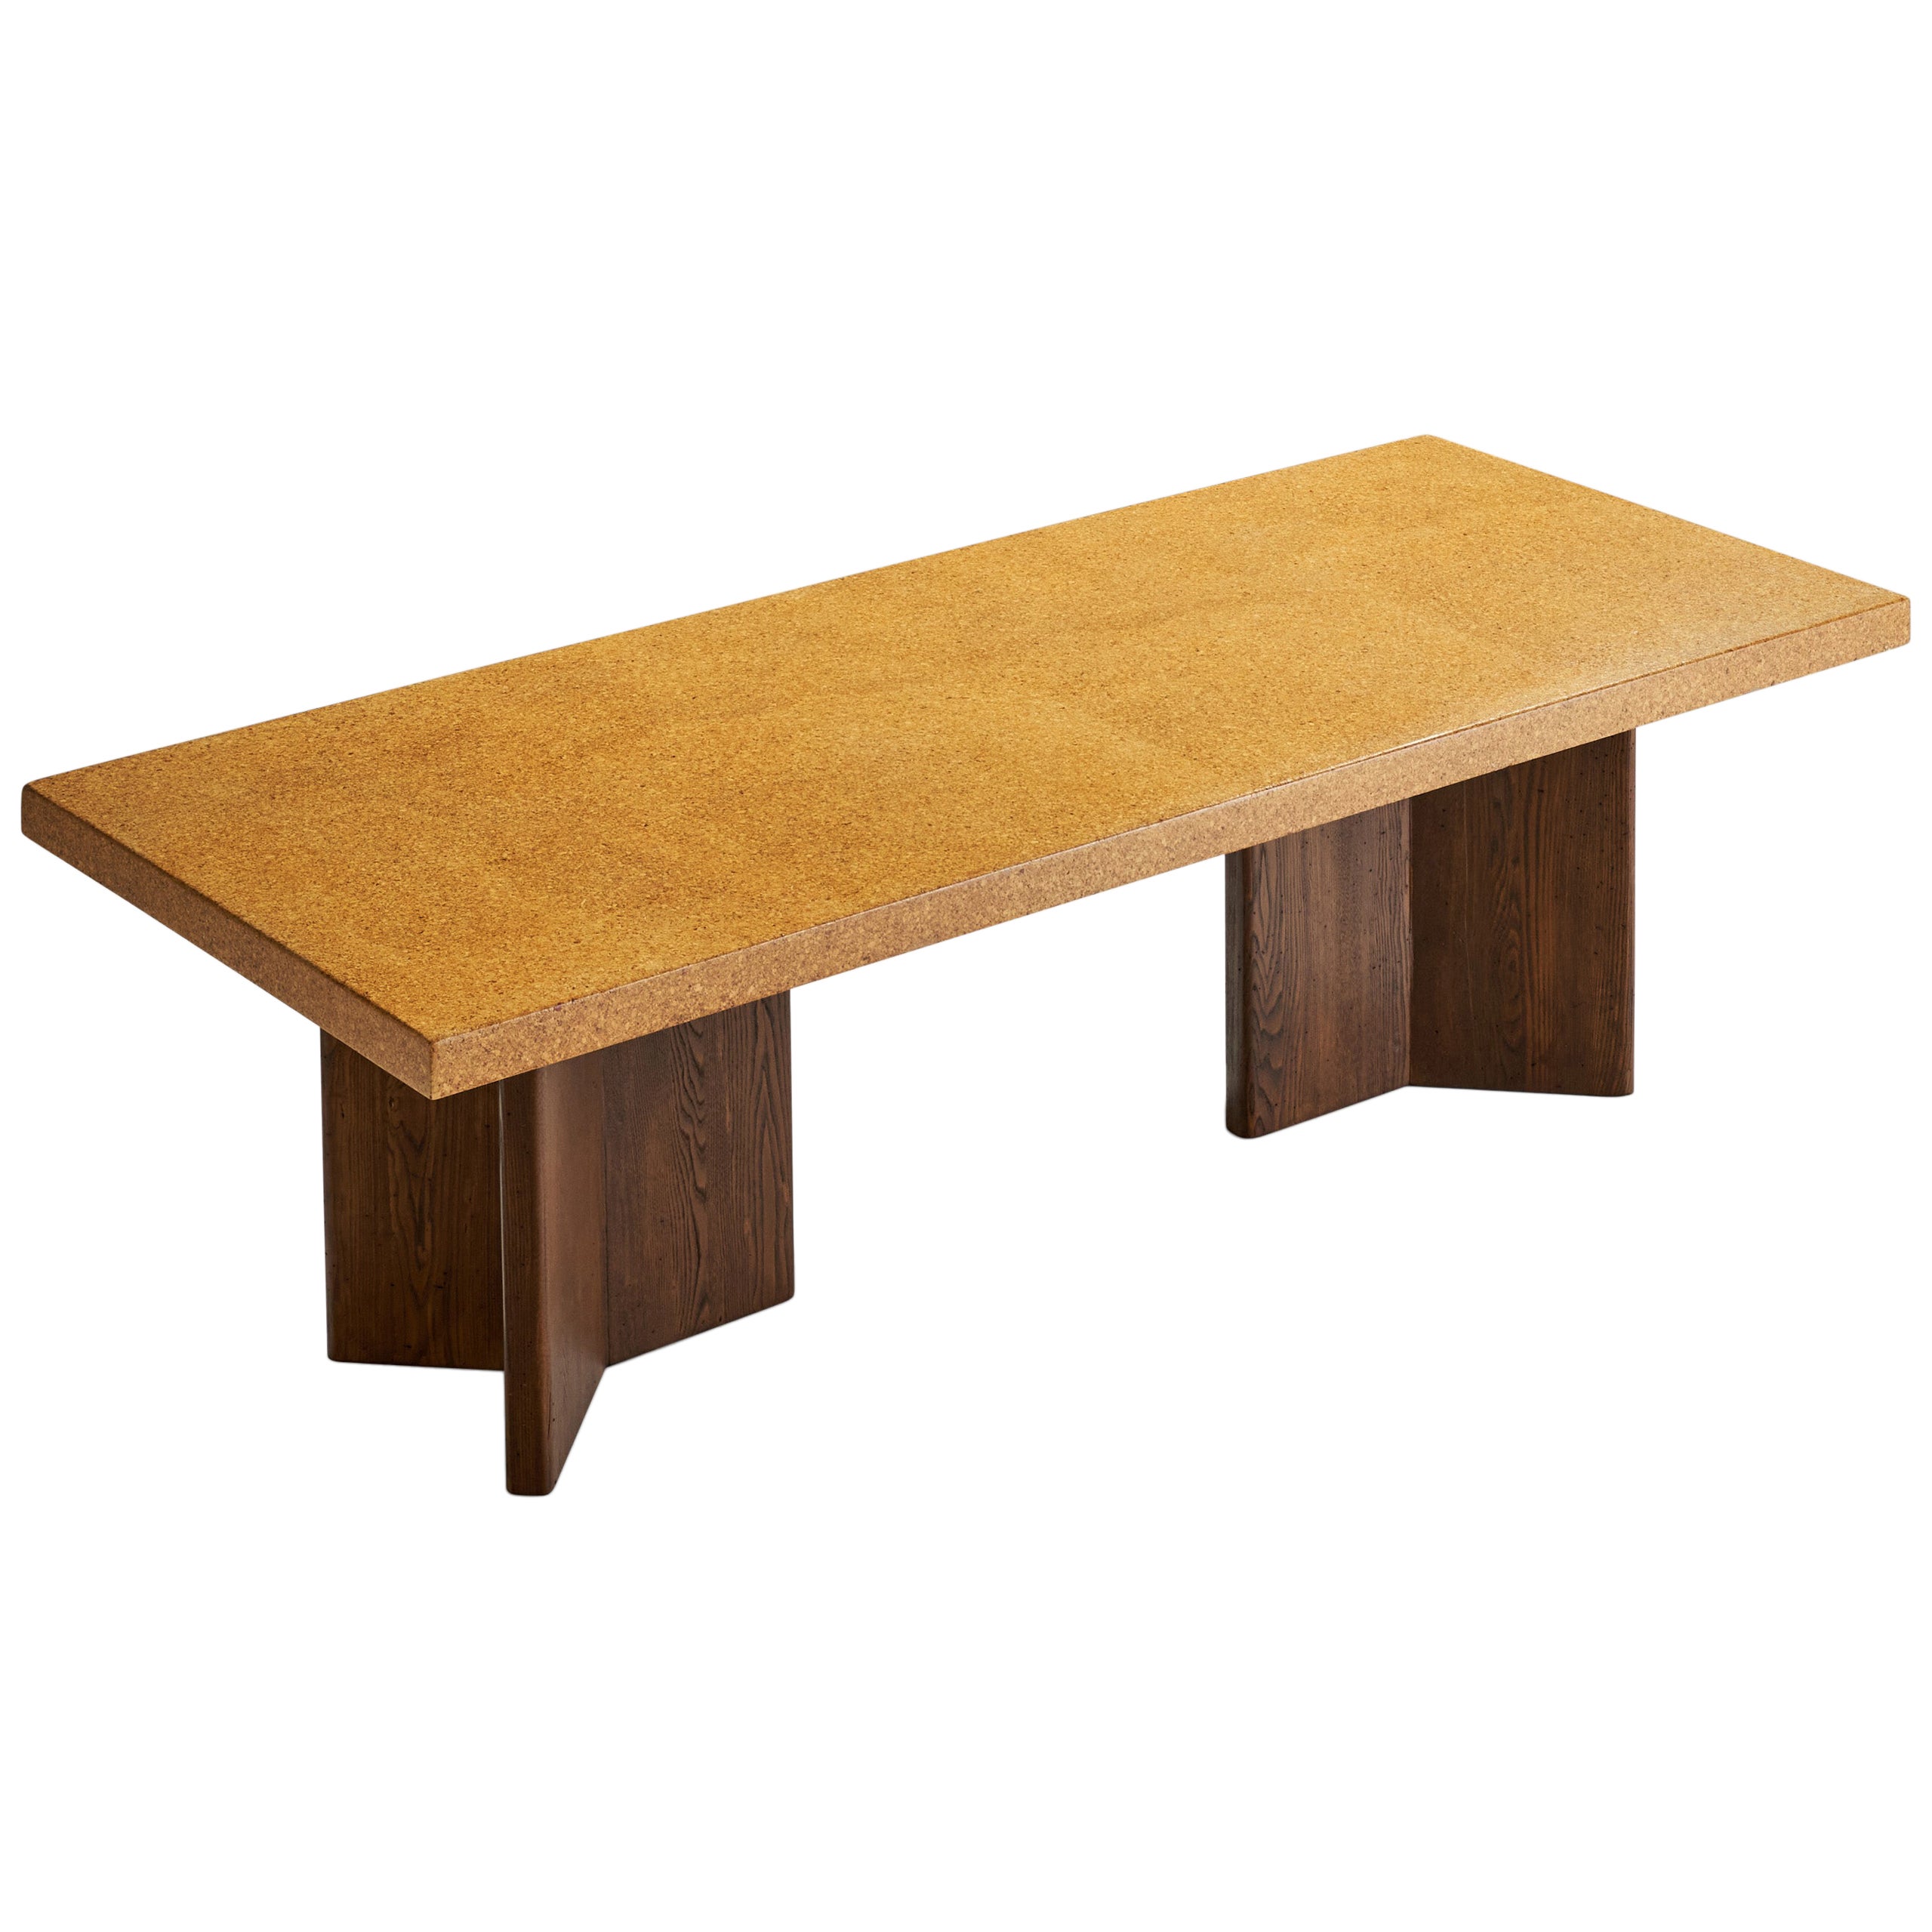 Paul Frankl, Dining Table, Cork, Mahogany, USA, 1940s For Sale